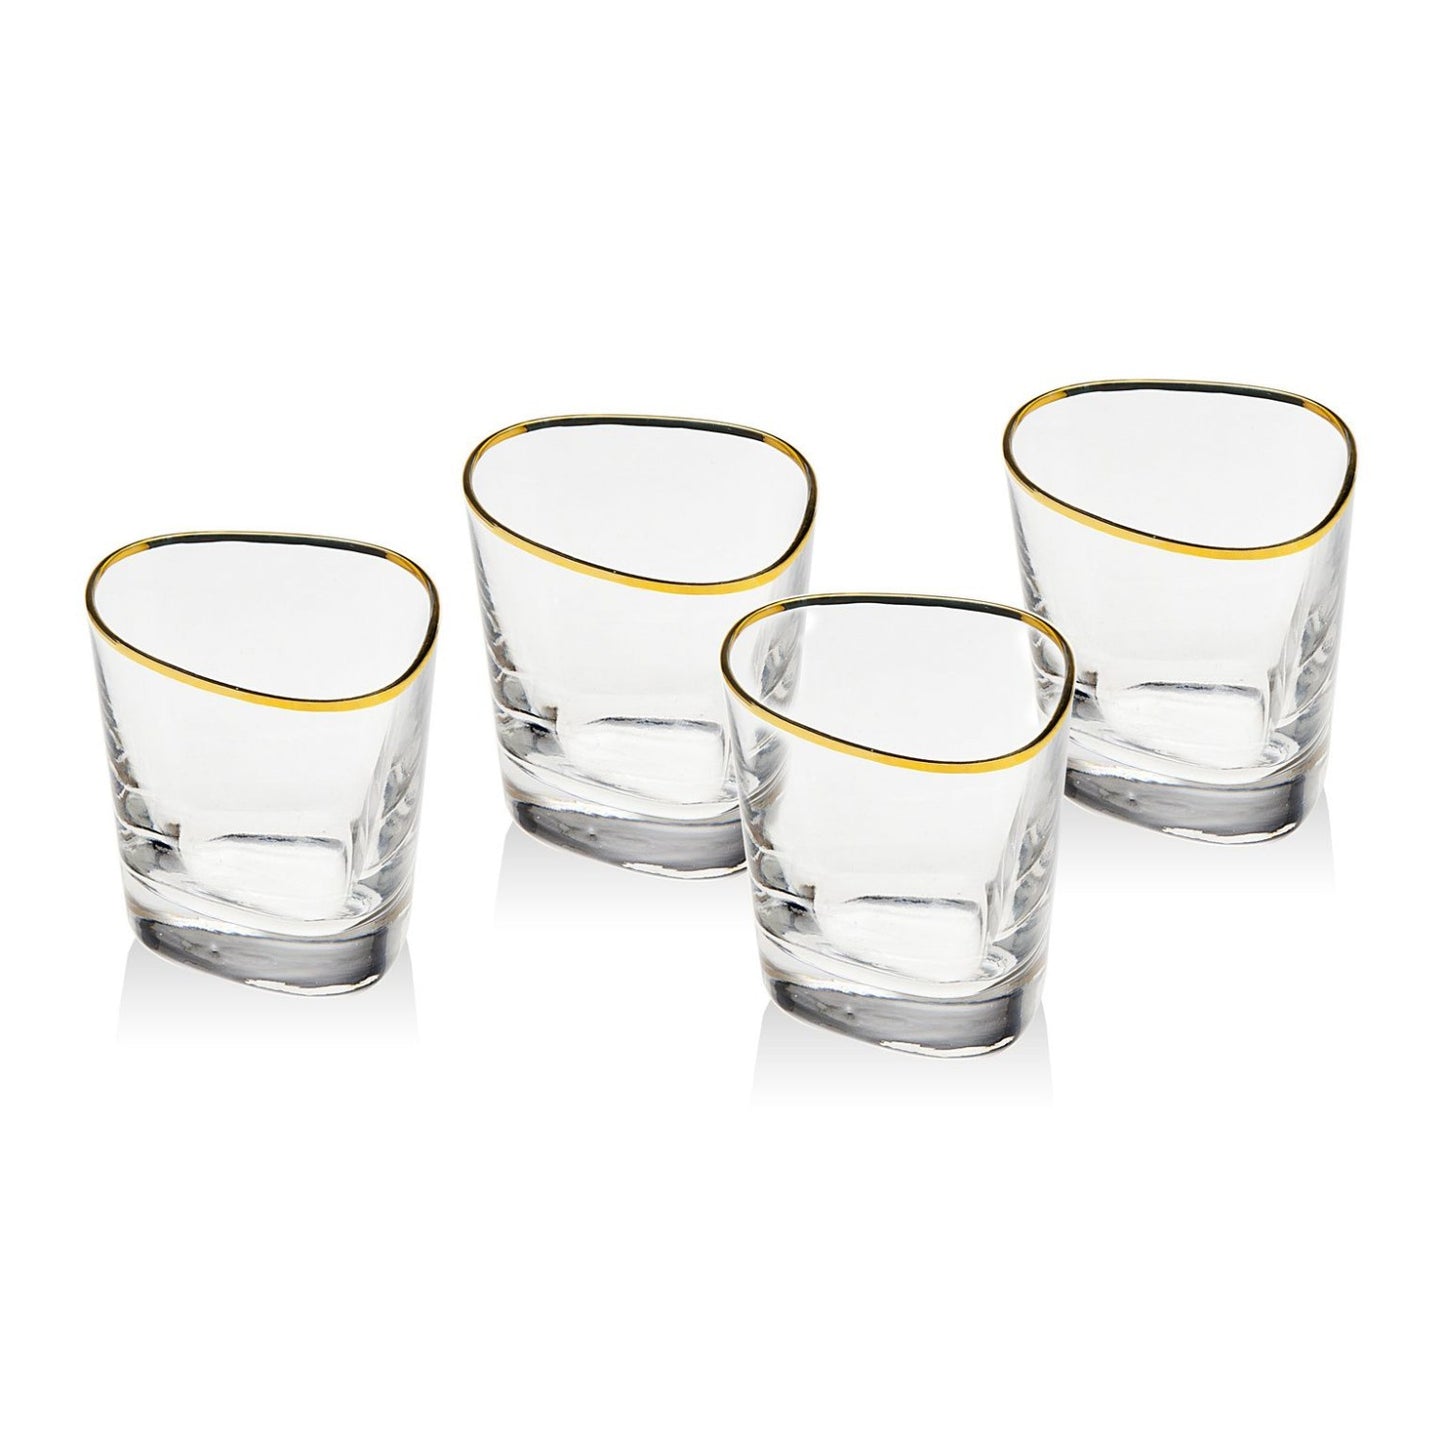 Godinger Cosmos Set of 4 Gold Banded Double Old Fashioned